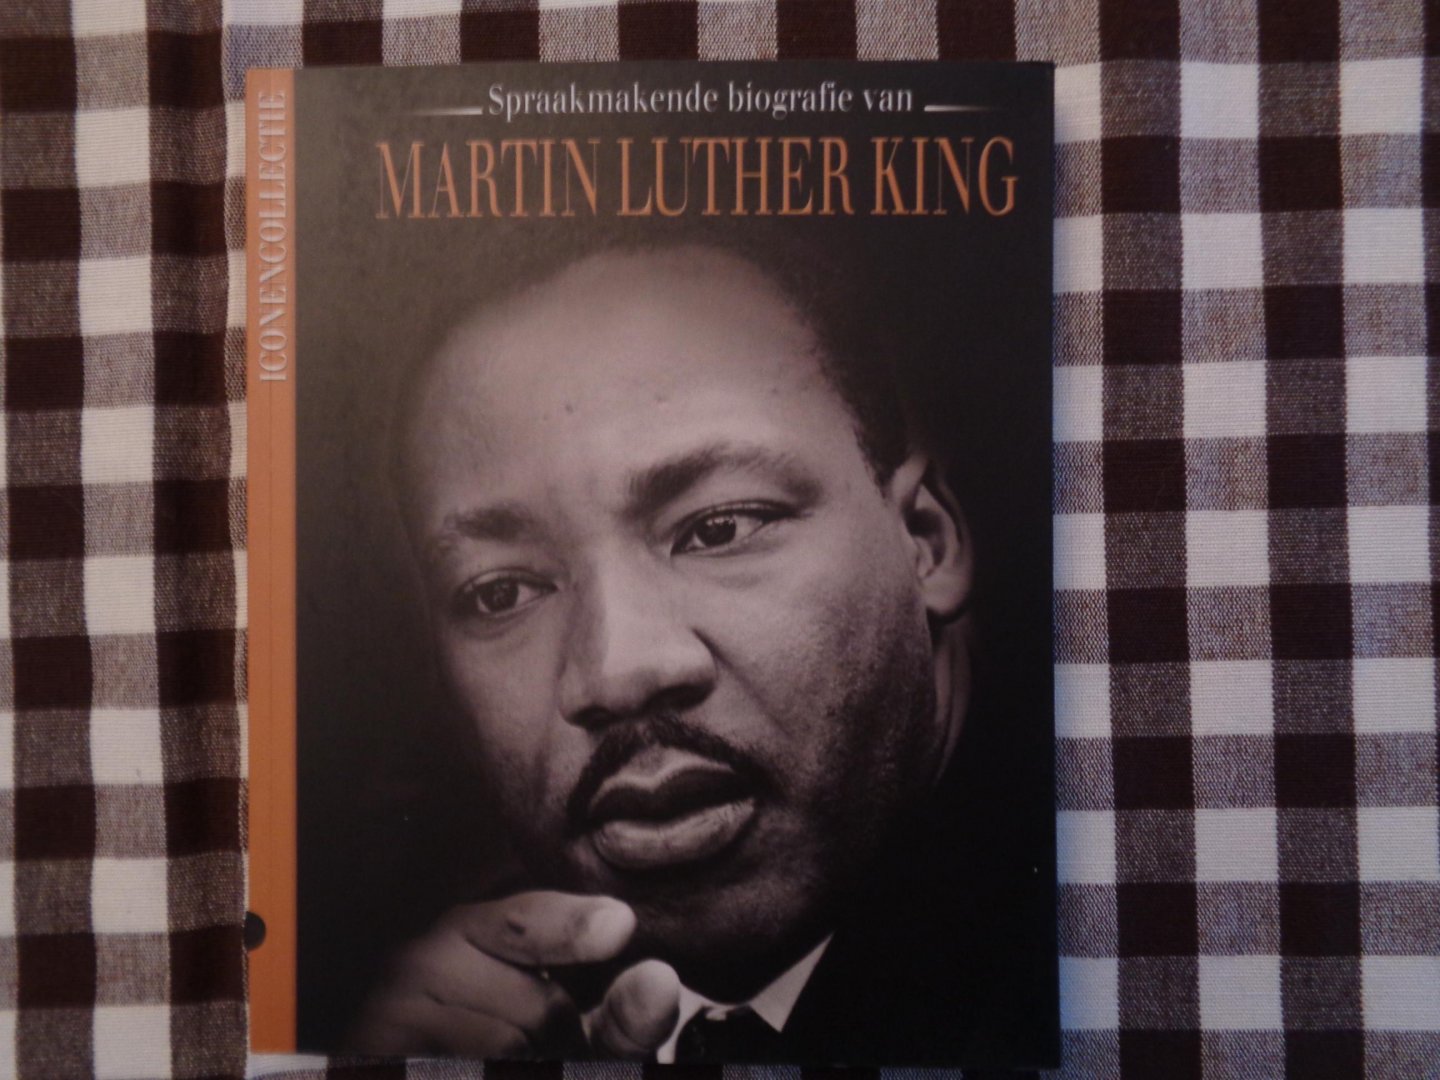 anneke drijver - martin luther king